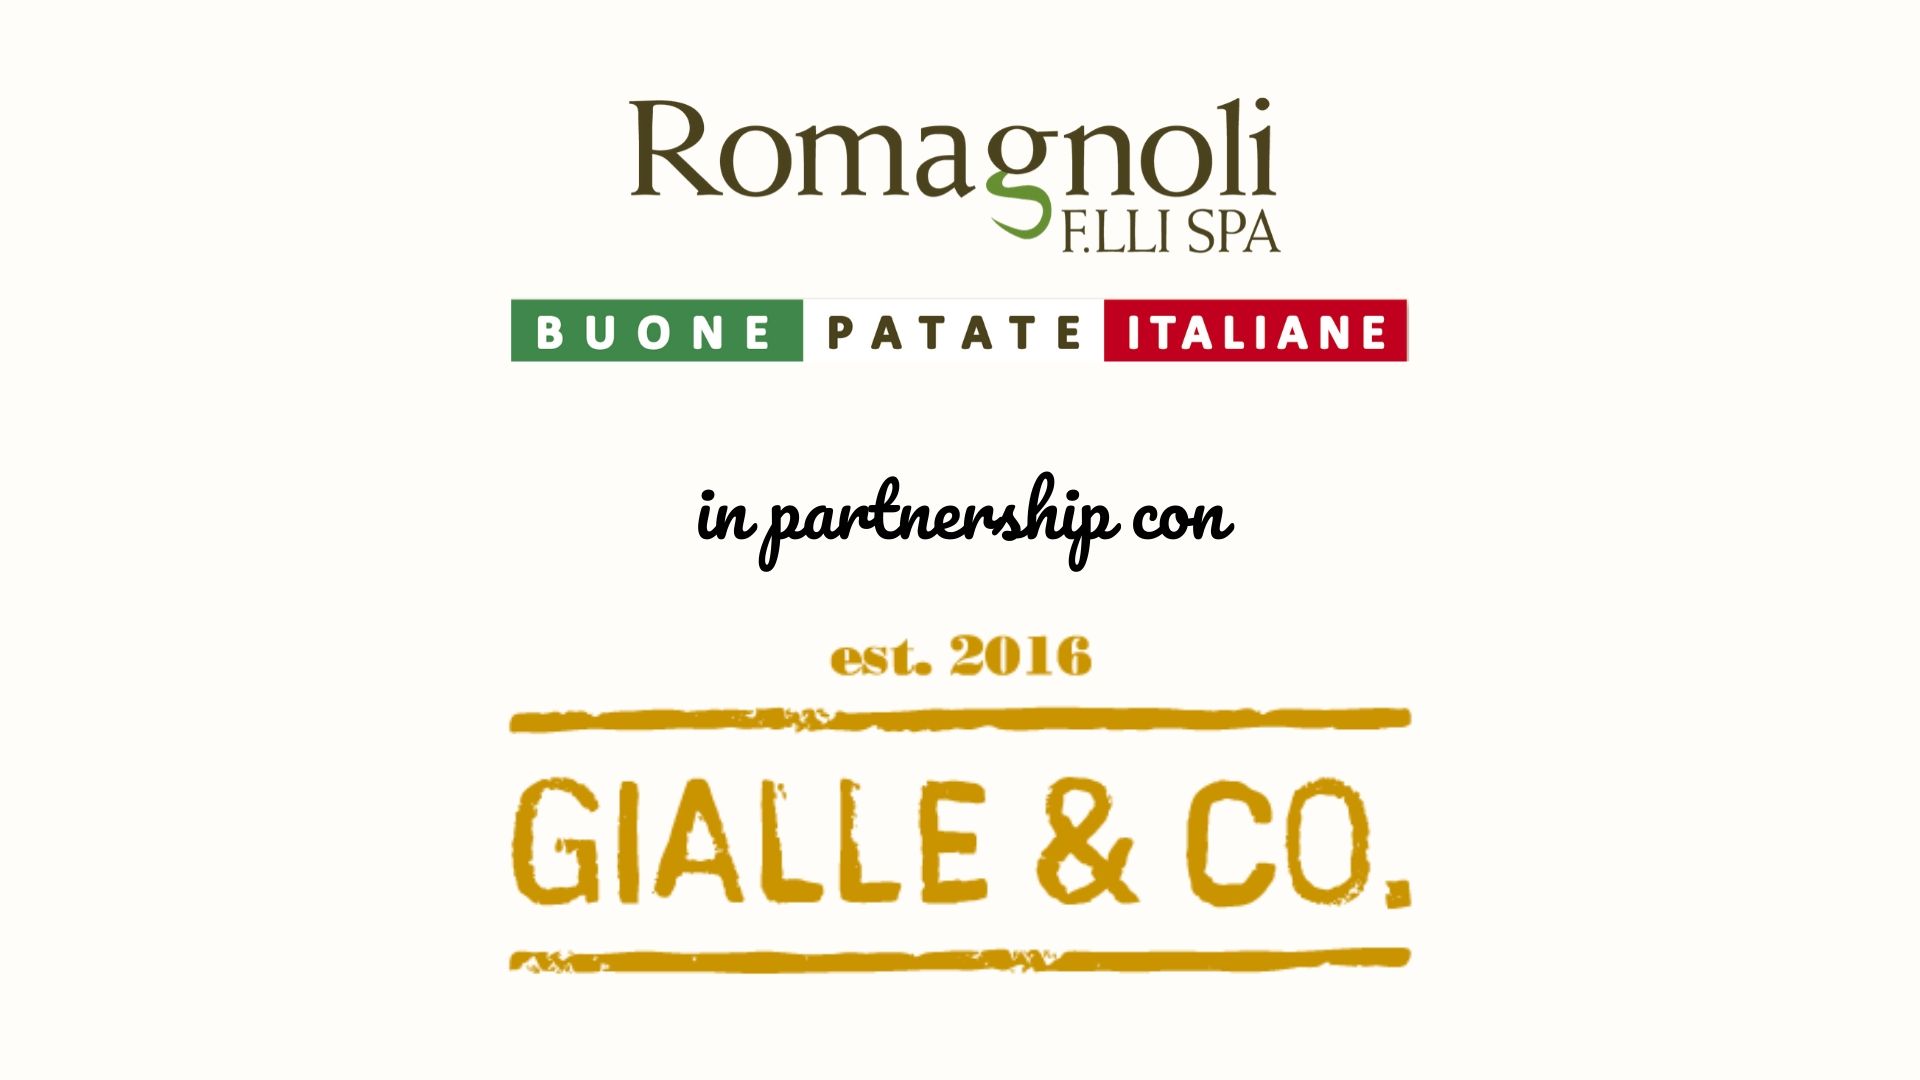 Romagnoli F.lli and Gialle & Co.: a partnership all about flavour